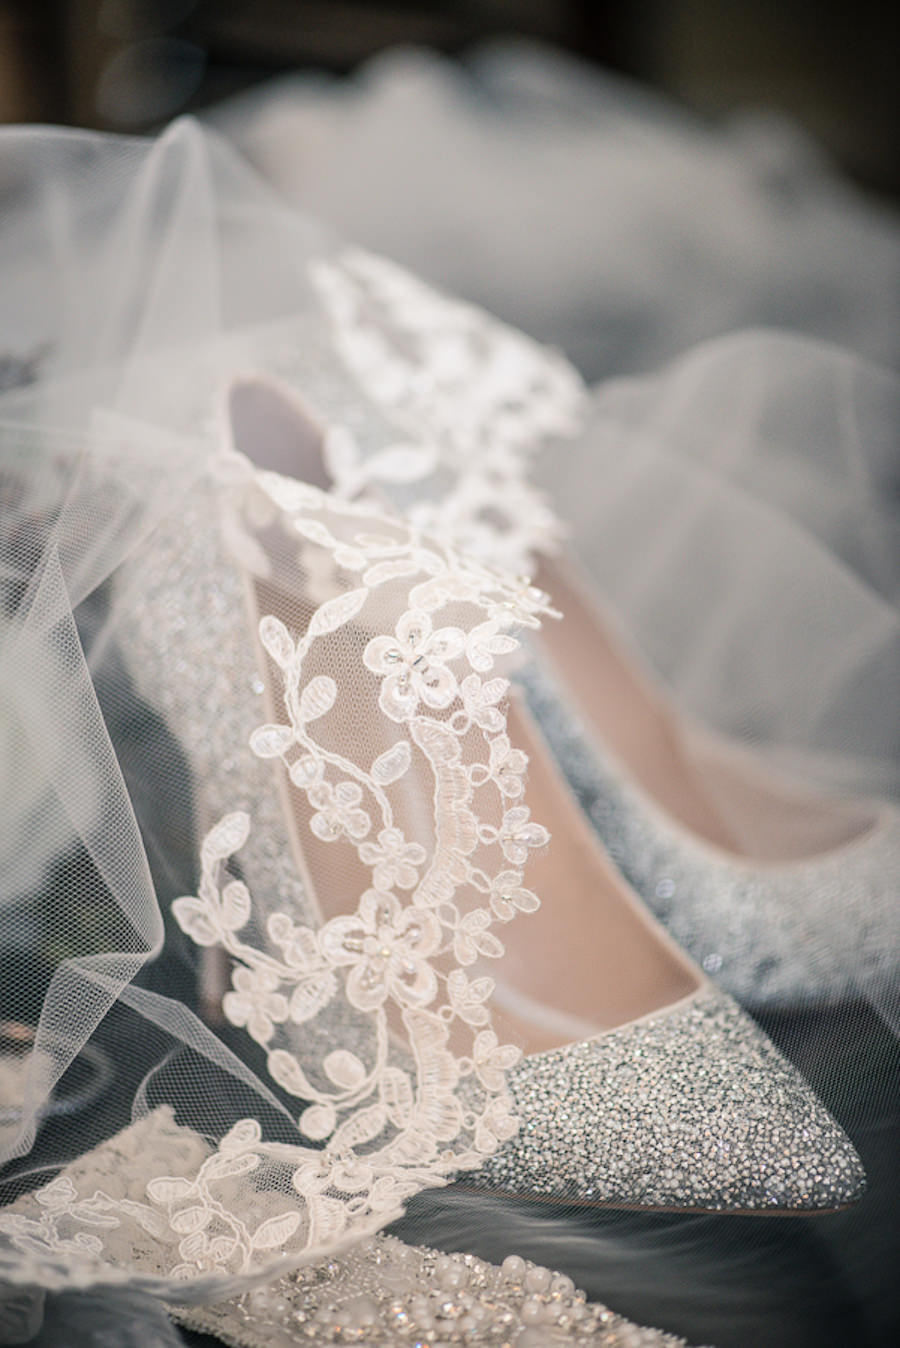 Getting Ready Bridal Accessorices | Silver Glitter Bridal Heels with Pearl and Rhinestone Garter and Chantilly Lace Scalloped Veil